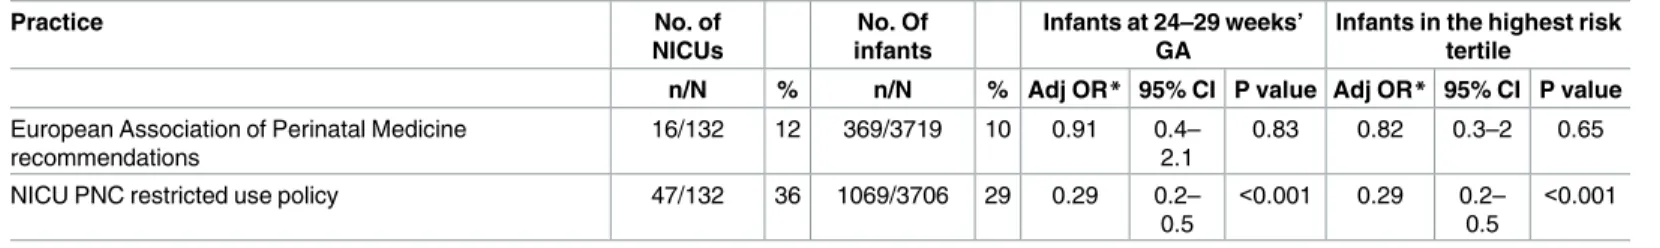 Table 4. Association of NICU practices and PNC use.